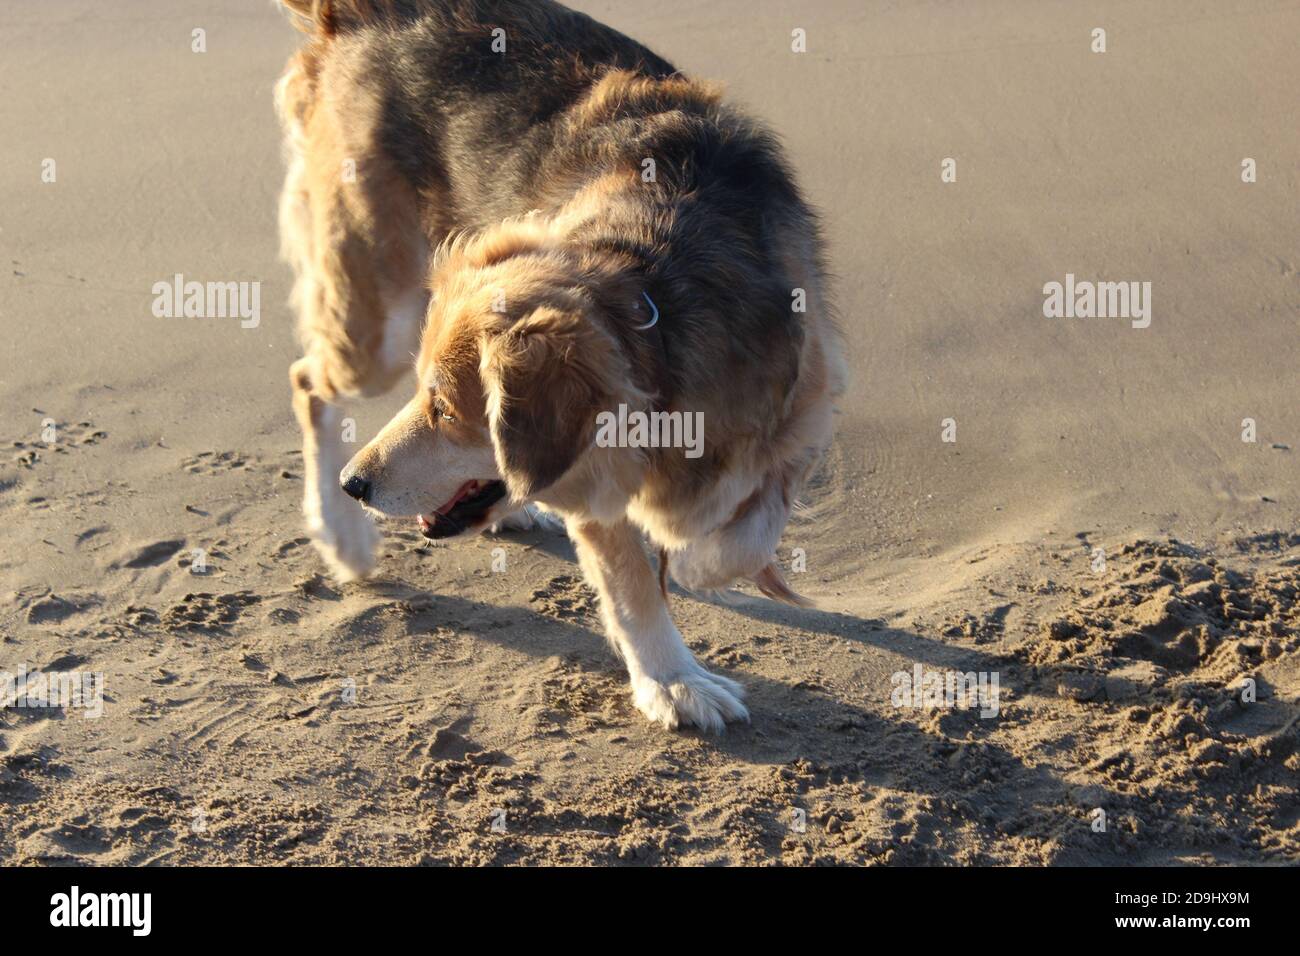 Hurt limping dog walking around on the sand, on the beach alone in golden hour Stock Photo